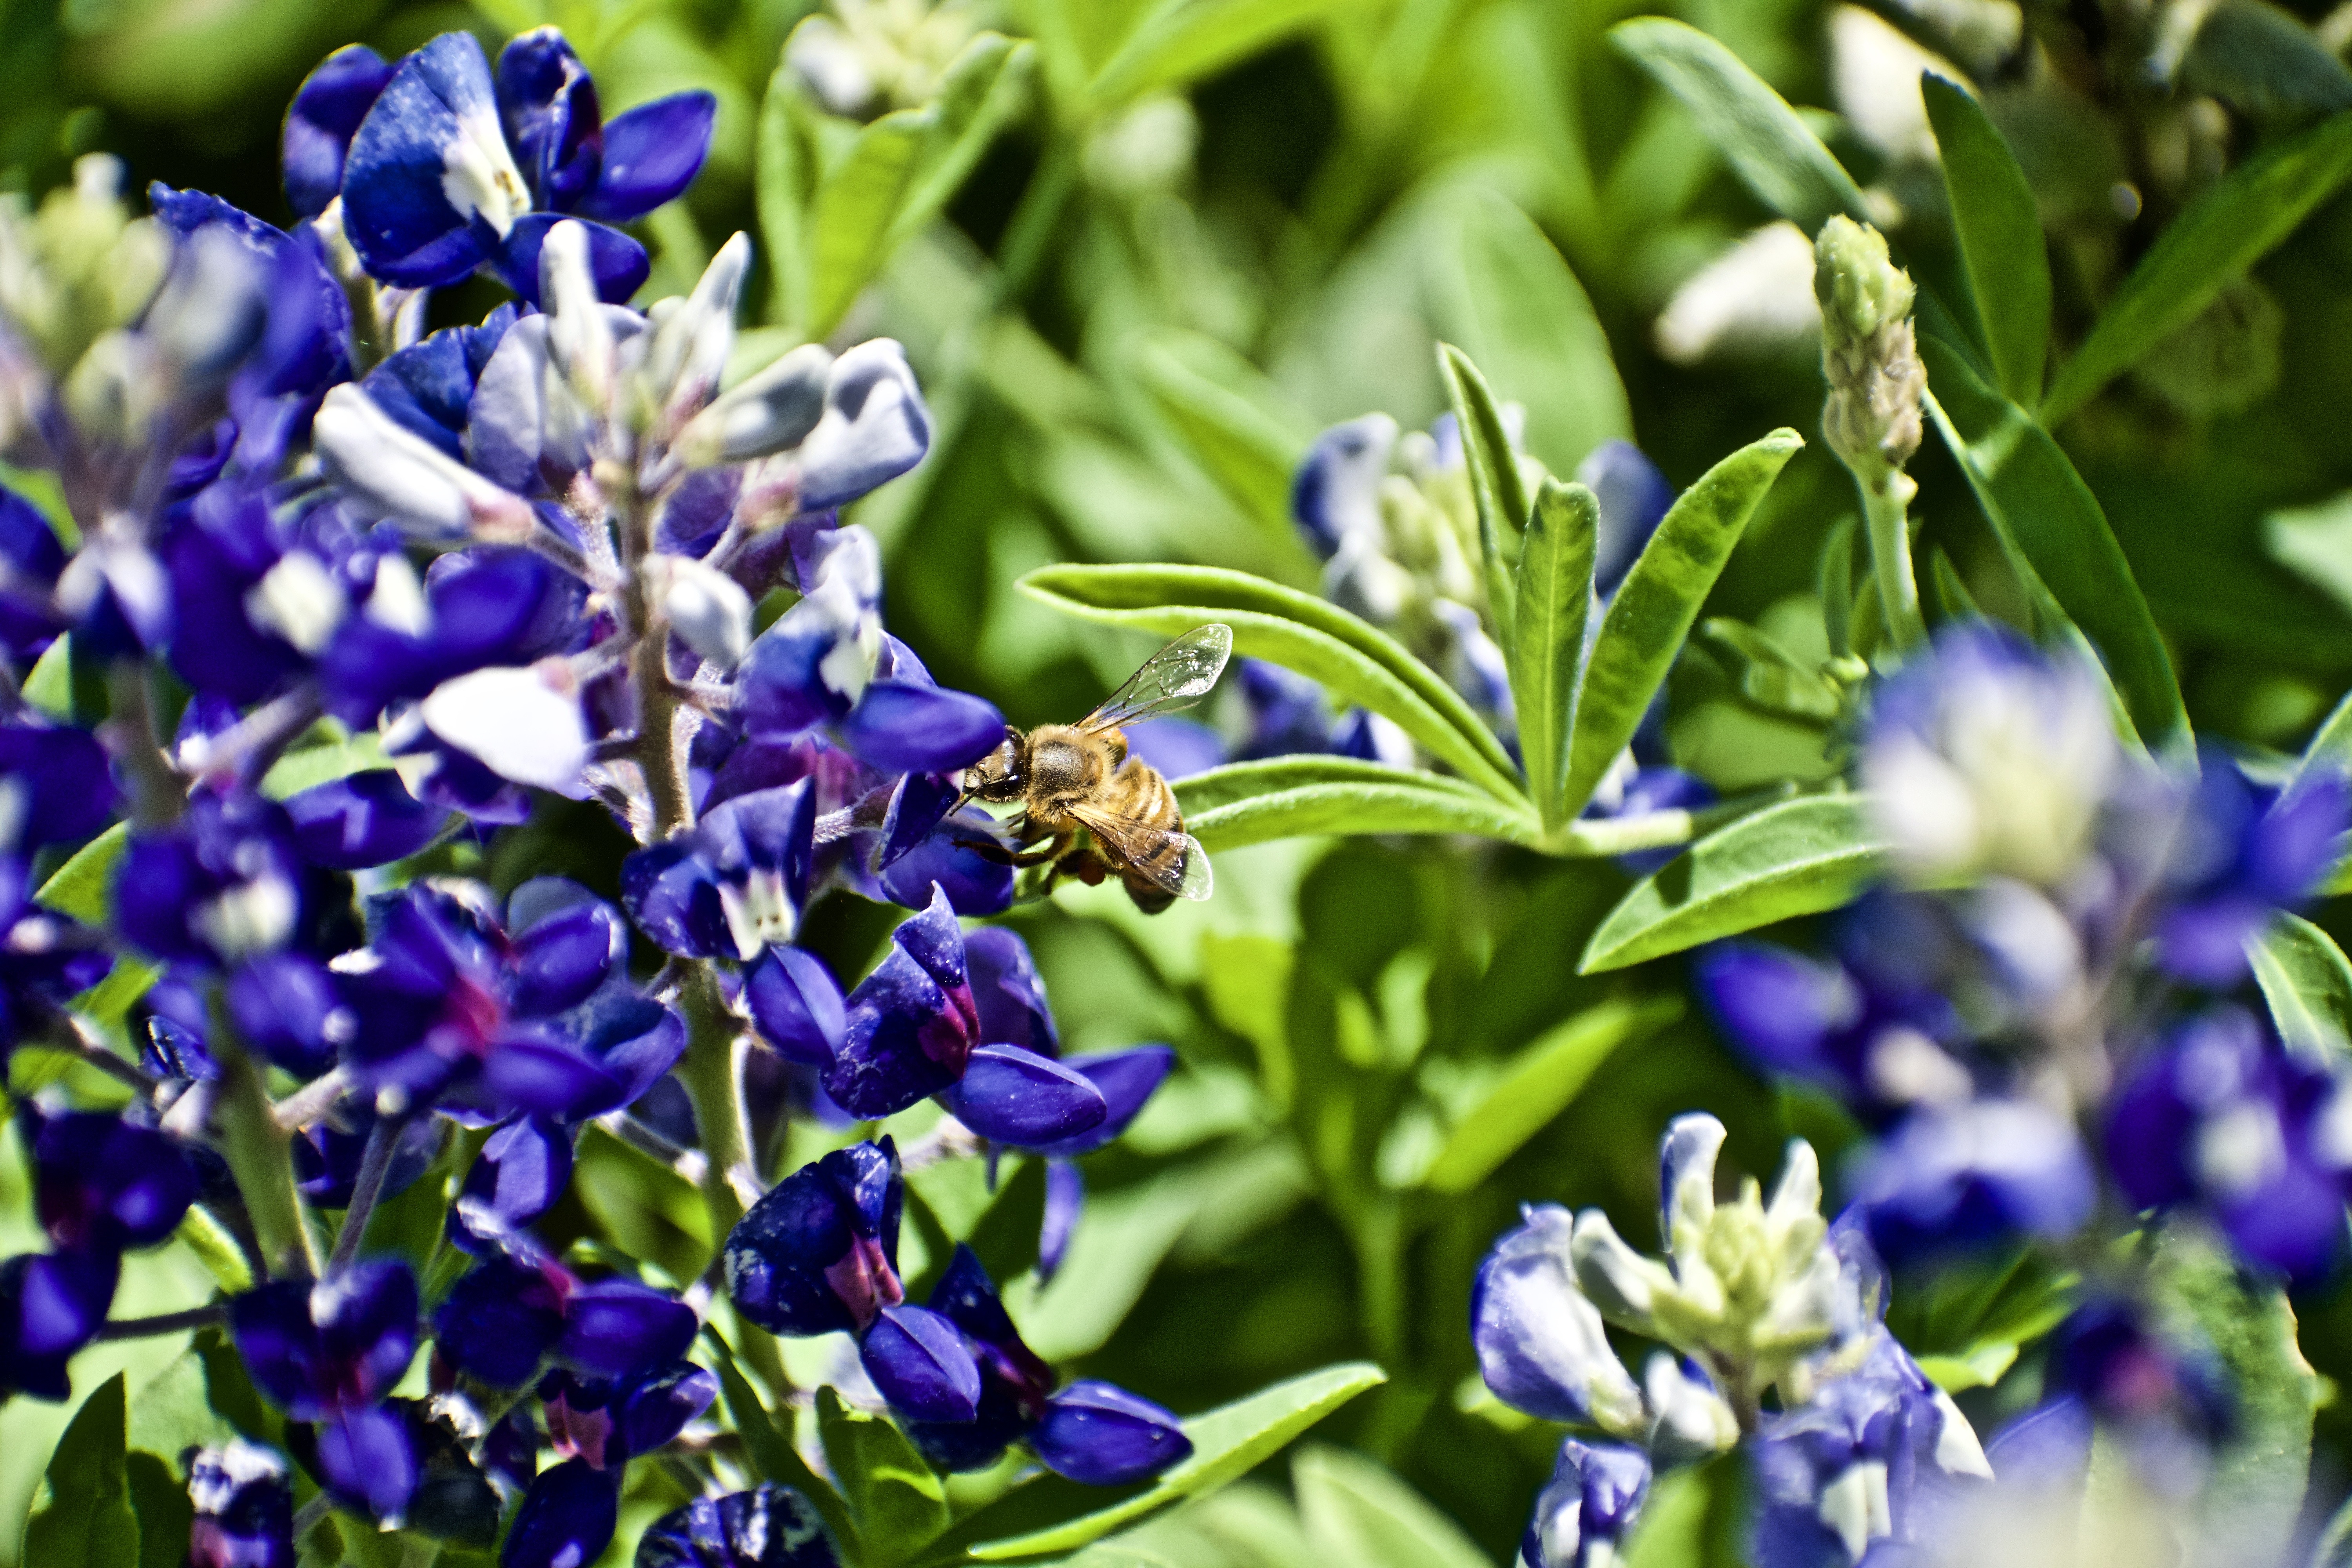 “New camera begins with Texas Bluebonnets.”